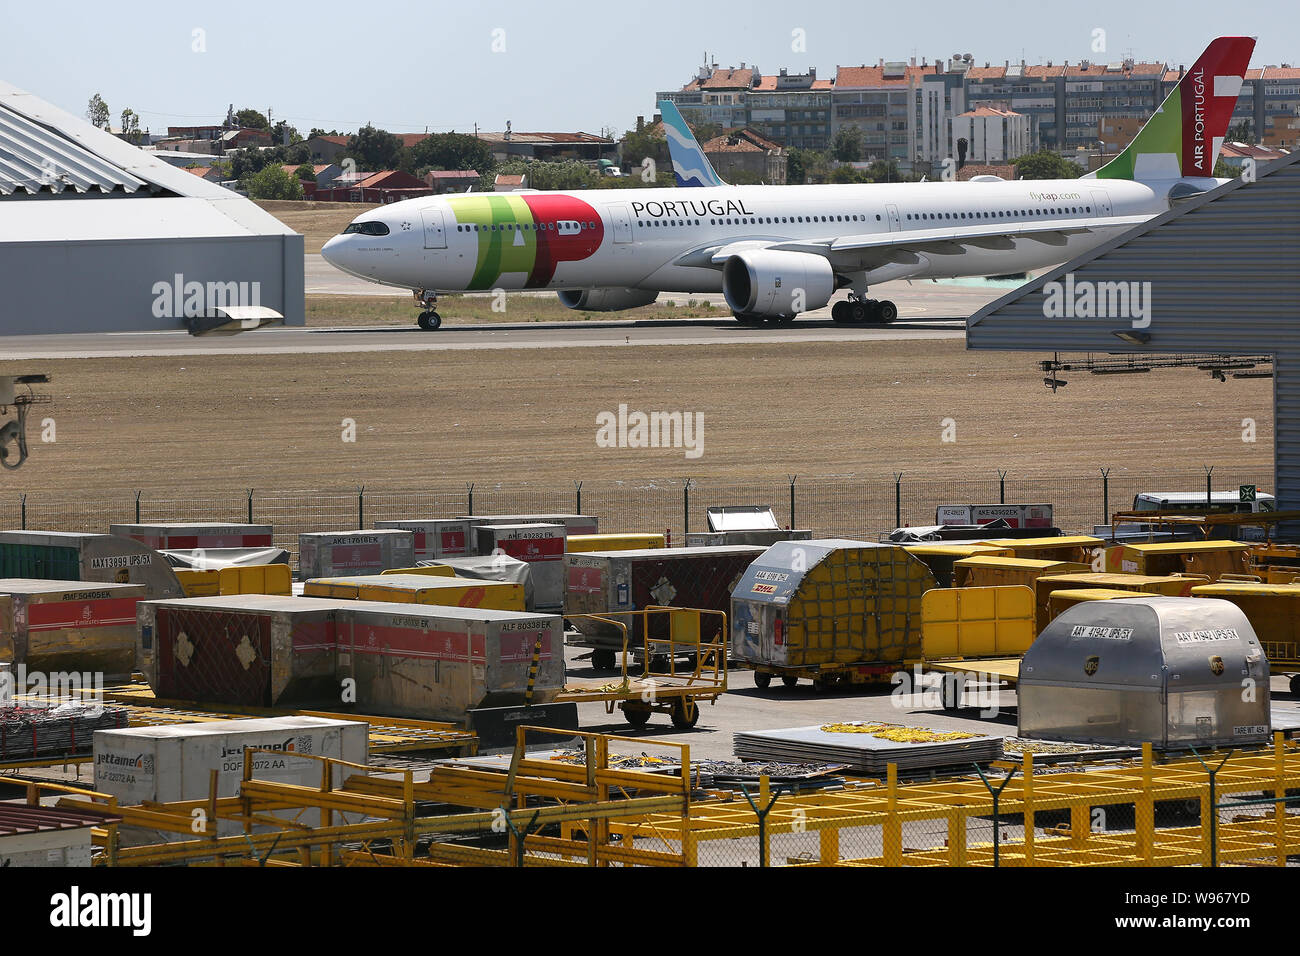 Lisbon, Portugal. 12th Aug, 2019. An airplane prepares to take off at the Humberto Delgado Airport in Lisbon, Portugal, on Aug. 12, 2019. Portuguese fuel-tanker drivers' national strike began as scheduled since Monday for an indefinite period. Portugal's government has ordered minimum services of between 50 percent and 100 percent and has declared an energy crisis, which implies 'exceptional measures' to minimize the effects of strike to ensure the provision of essential services such as security forces and medical emergencies. Credit: Pedro Fiuza/Xinhua Stock Photo